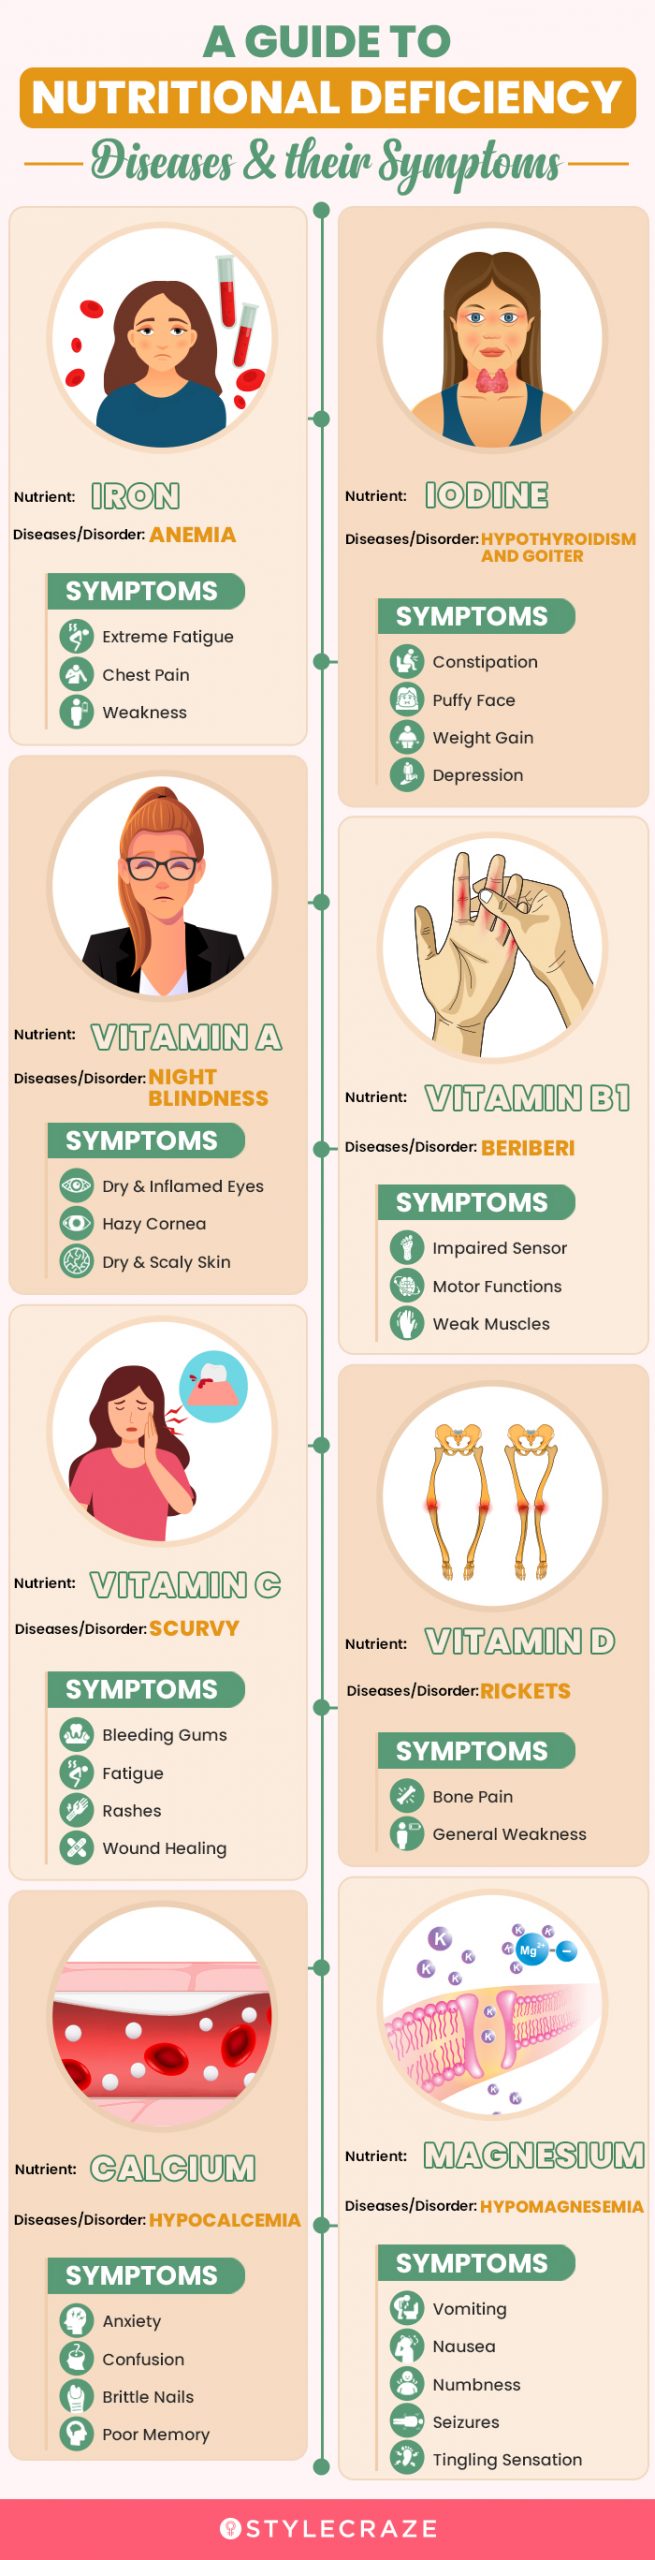 nutritional deficiency diseases (infographic)